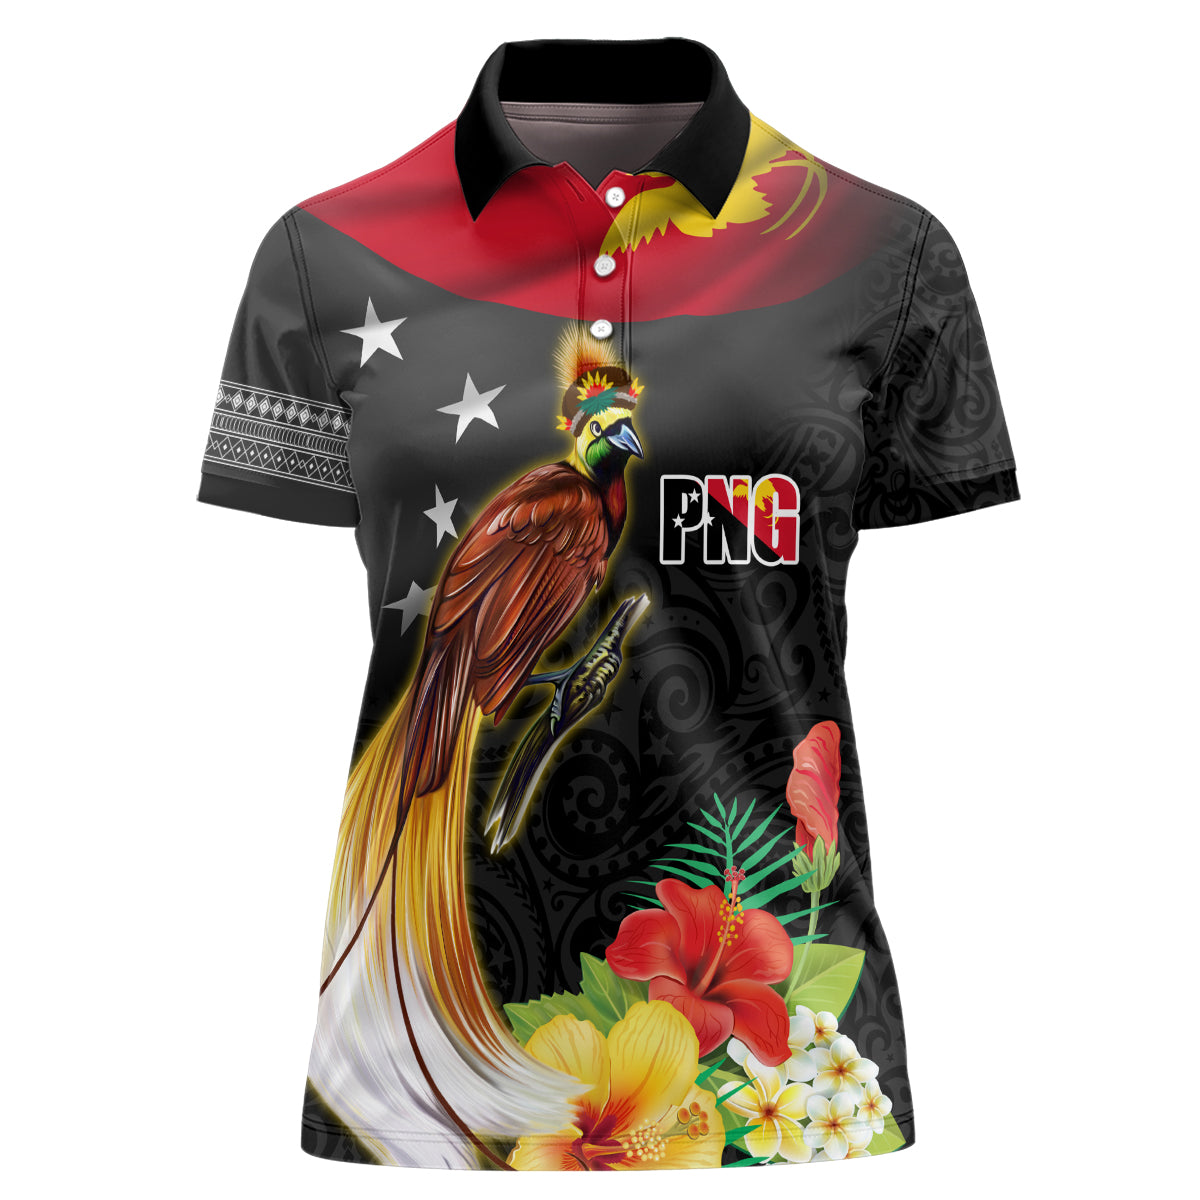 Papua New Guinea Independence Day Women Polo Shirt PNG Flag and Bird-of-Paradise